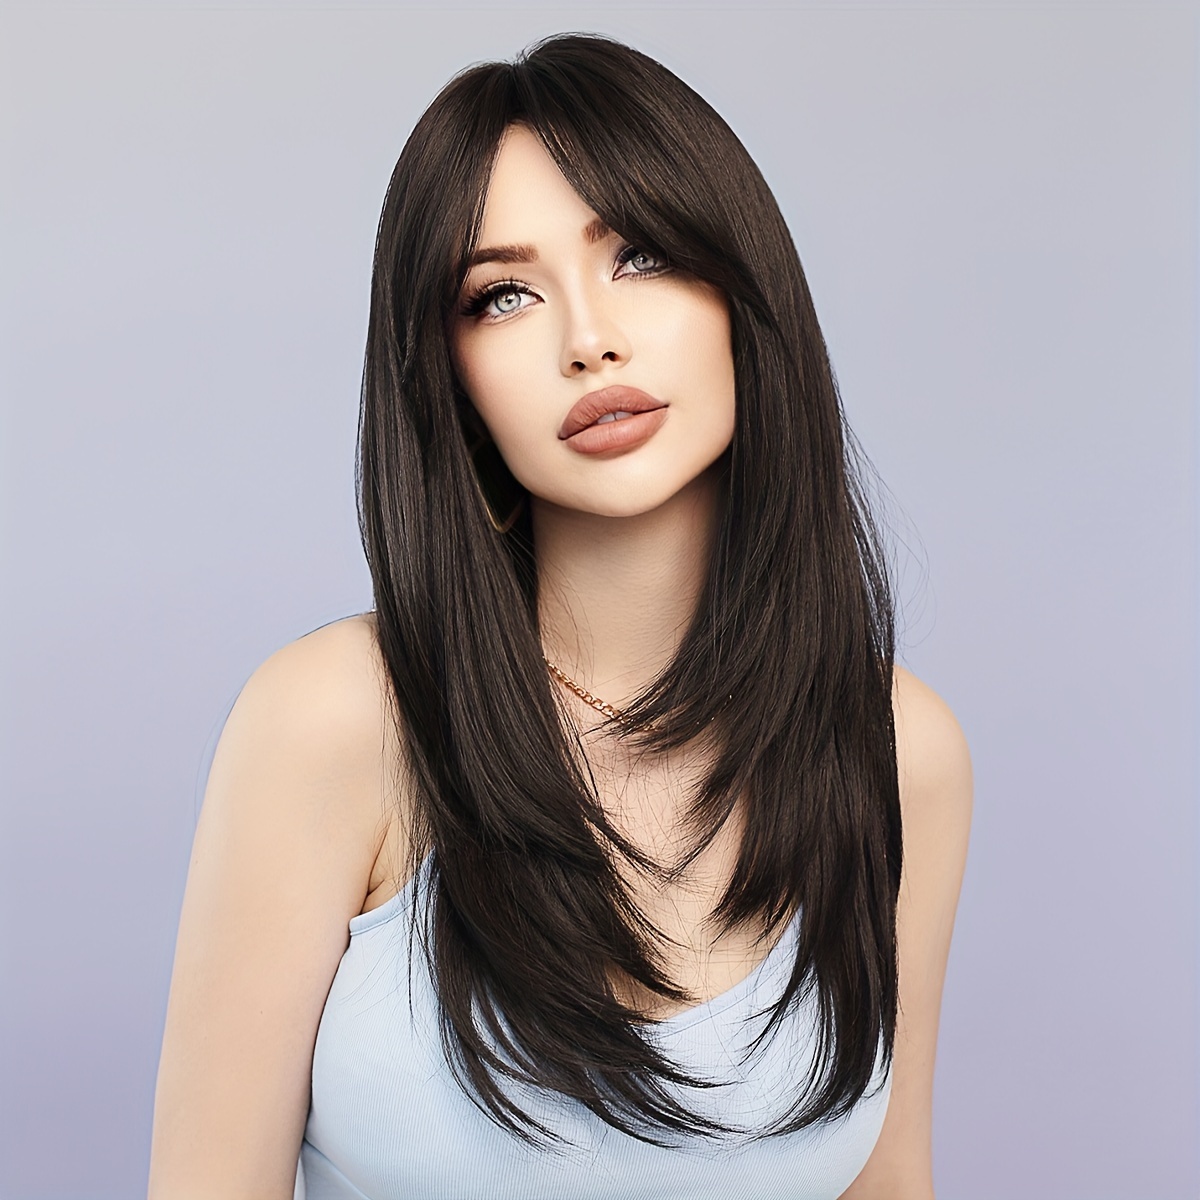 Long Black Layered Wigs for Women Long Straight Wig with Bangs